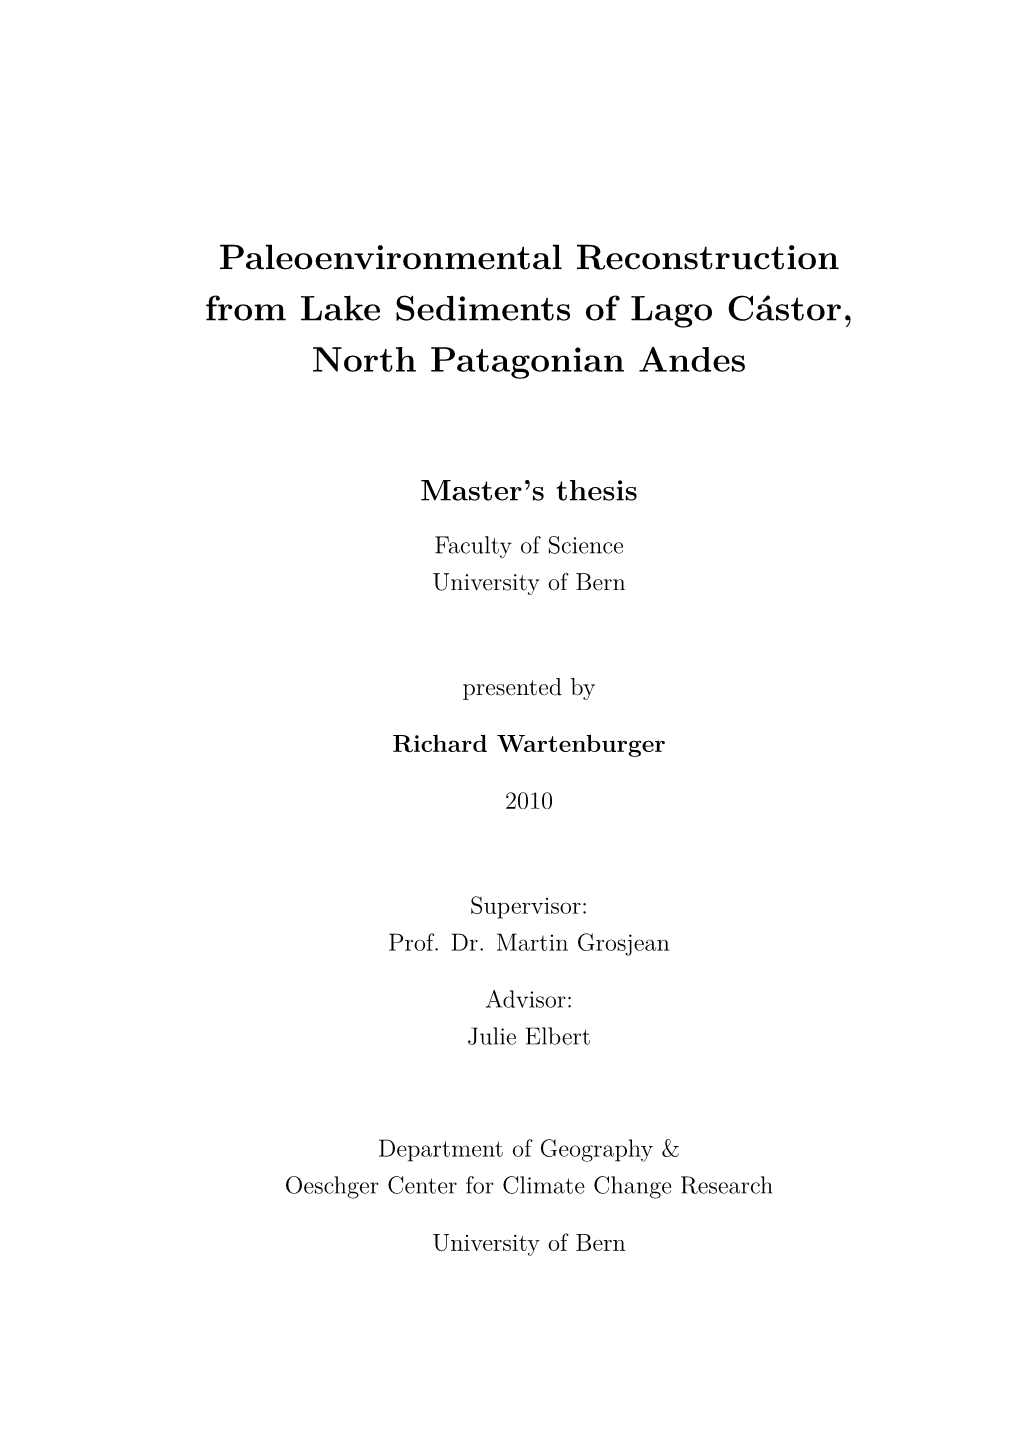 Paleoenvironmental Reconstruction from Lake Sediments of Lago C´Astor, North Patagonian Andes